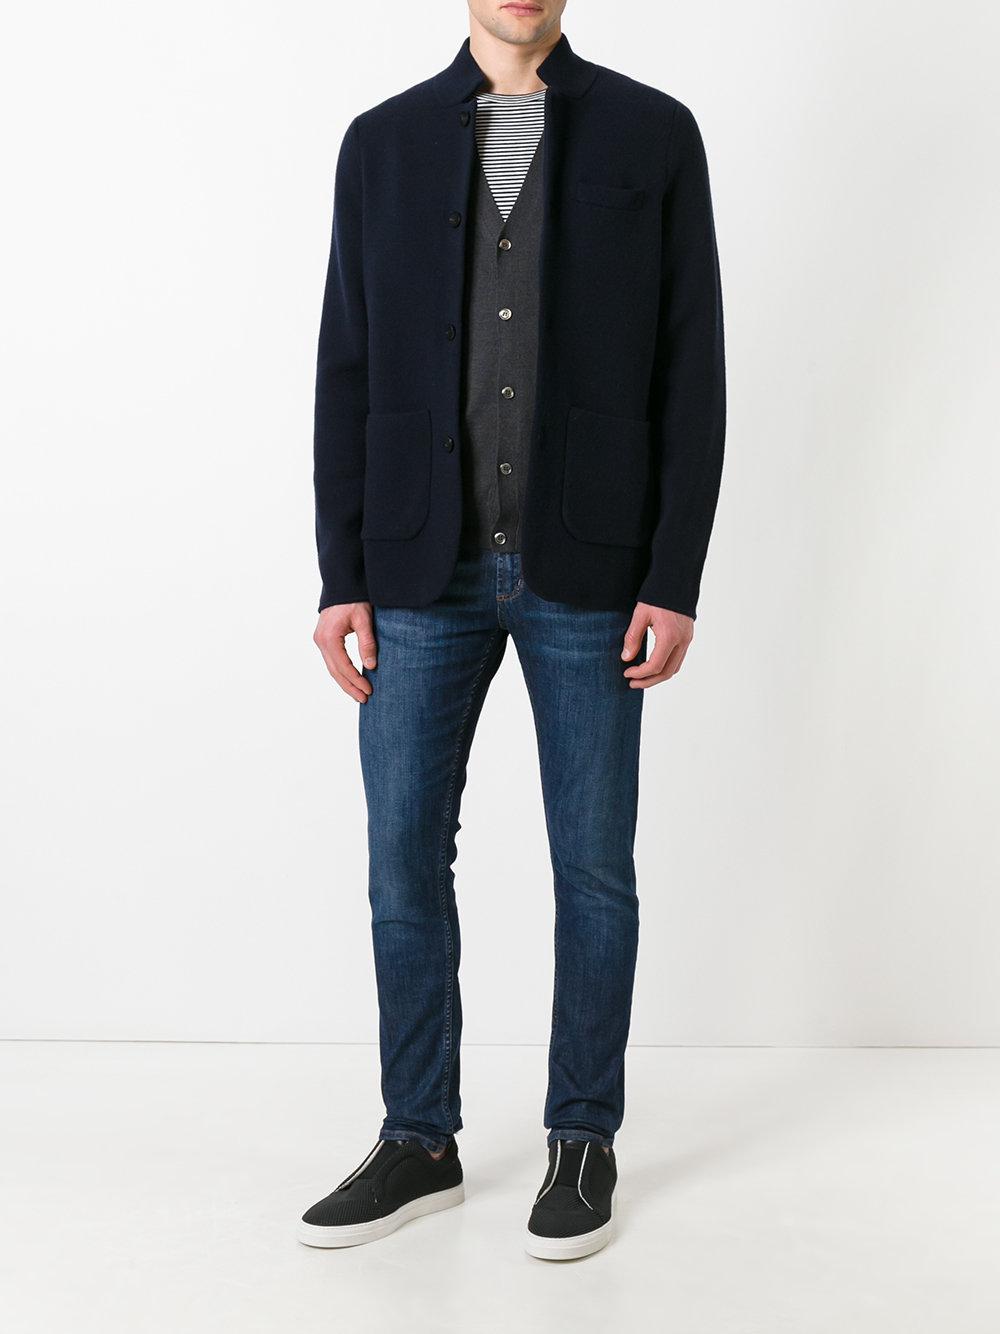 Lyst - N.Peal Cashmere Milano Jacket in Blue for Men